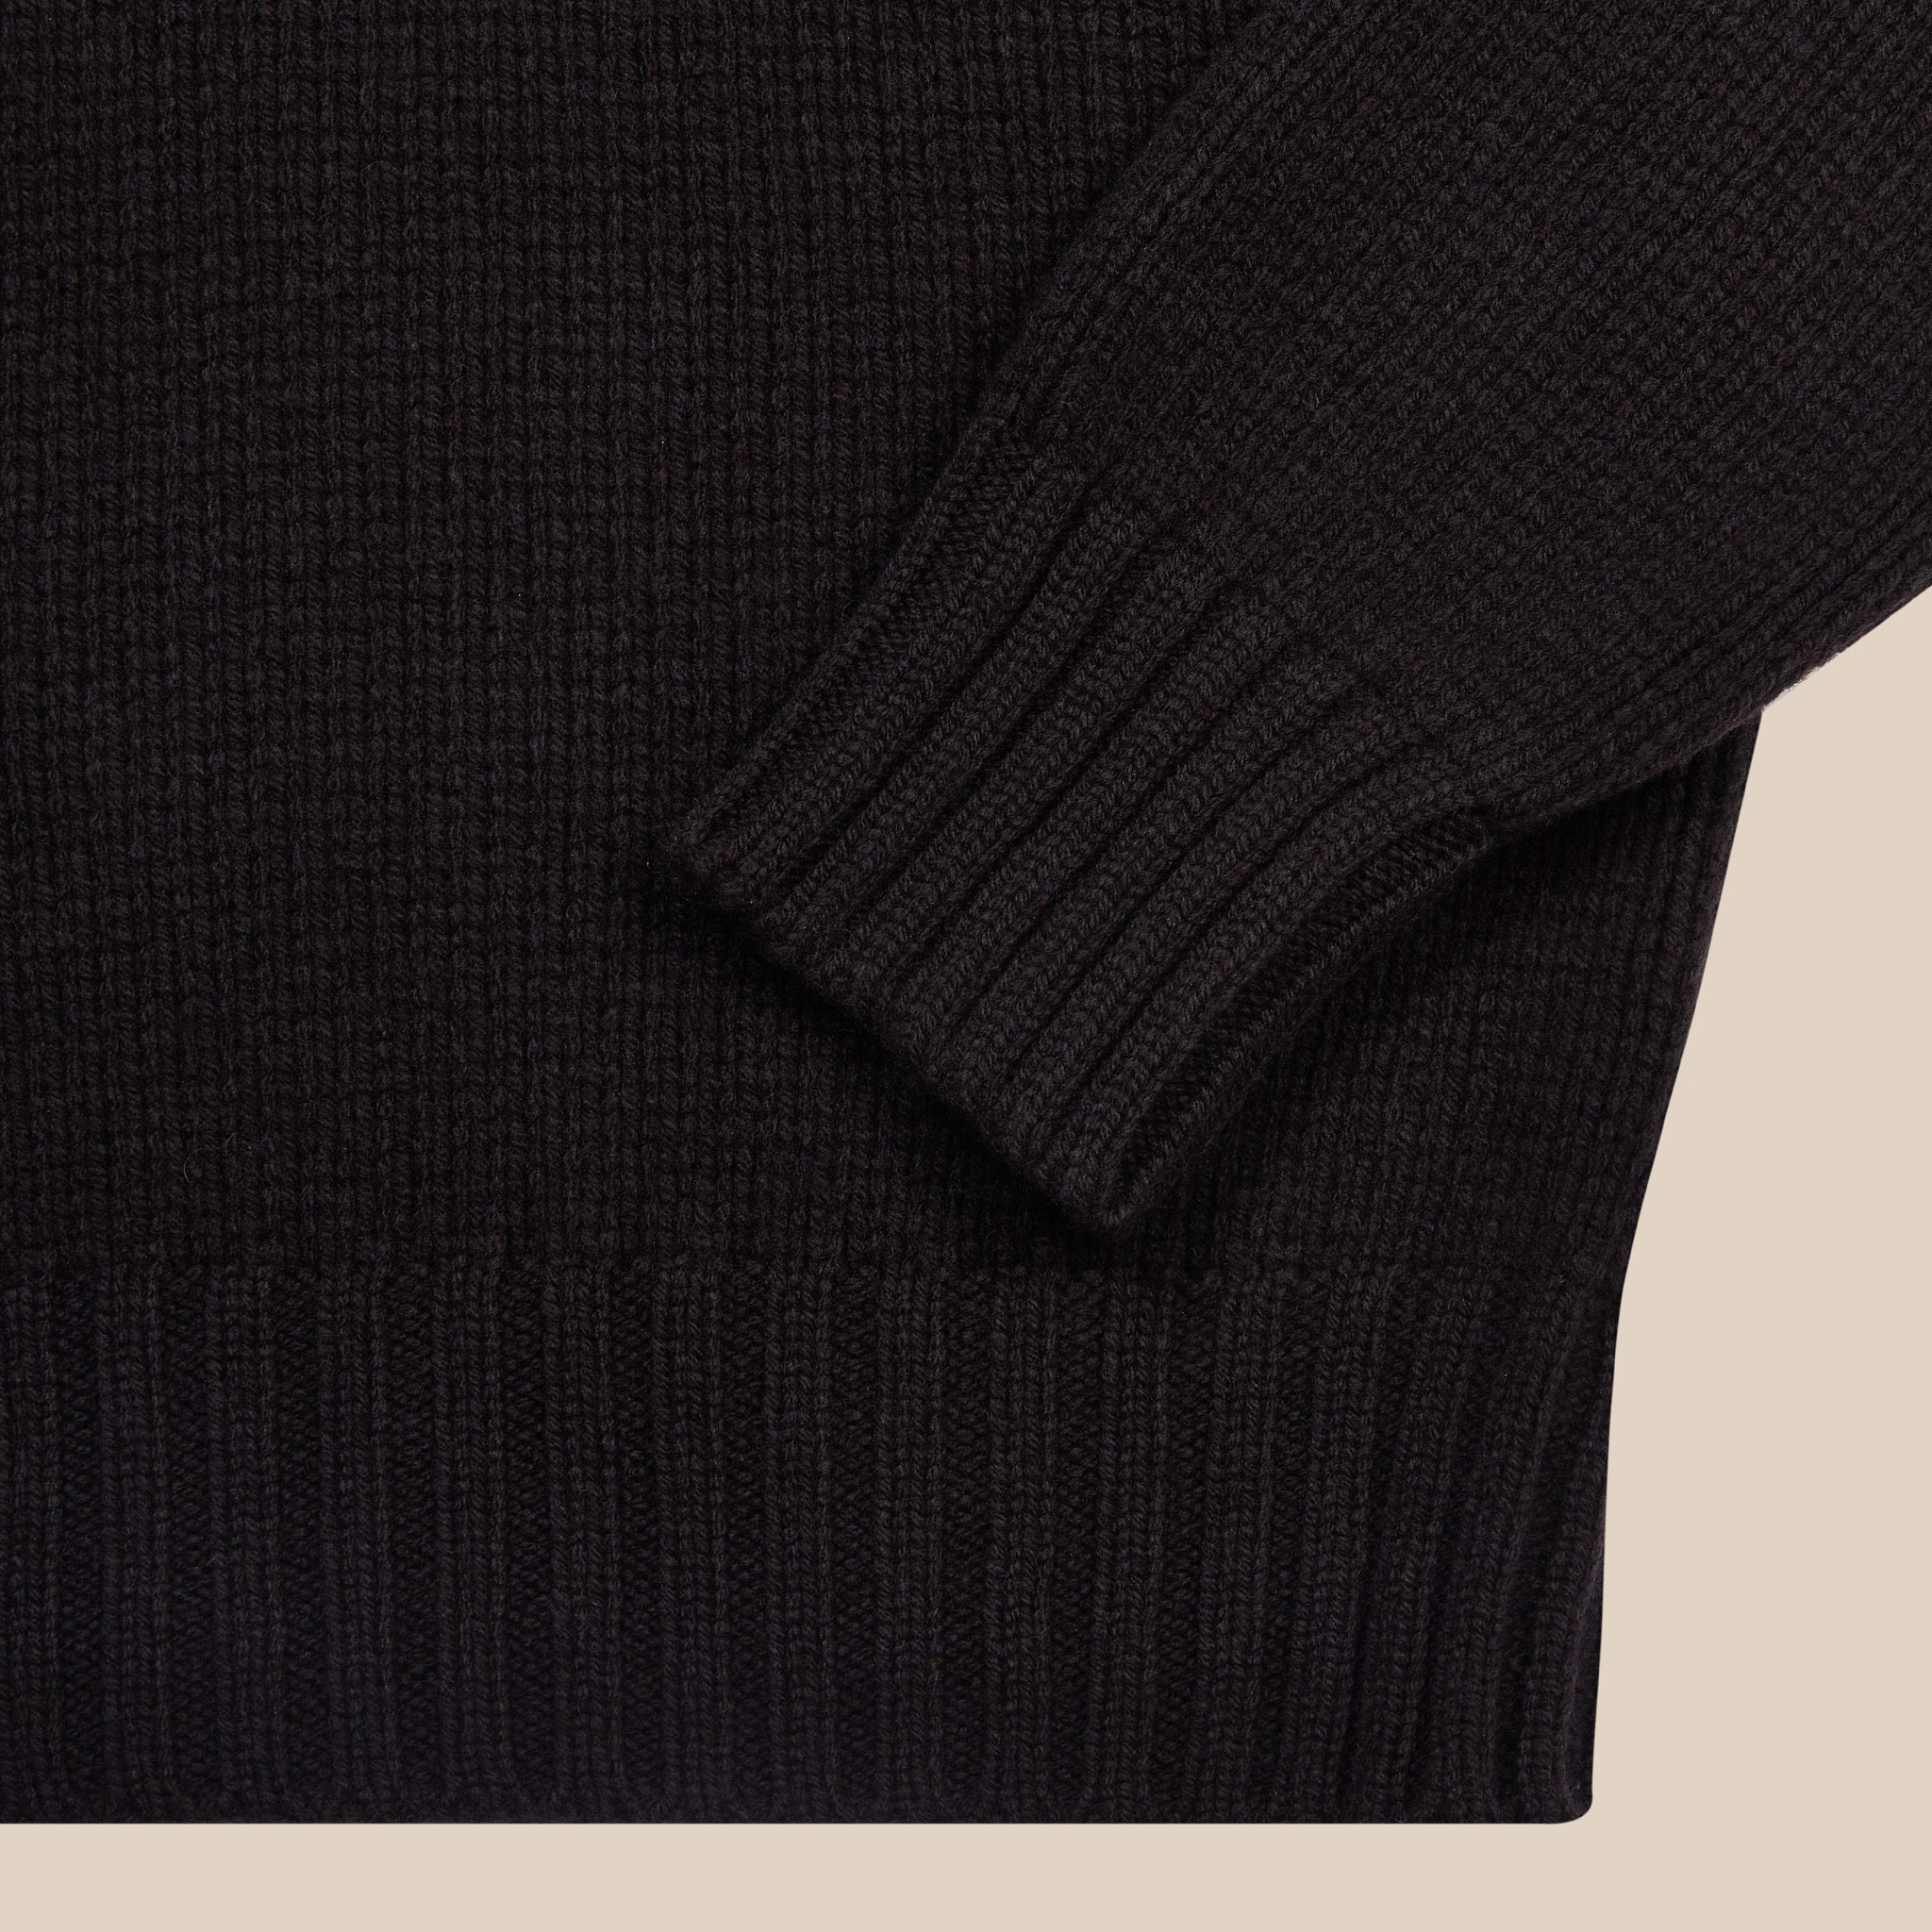 Superfine lambswool rugby shawl sweater in dark brown